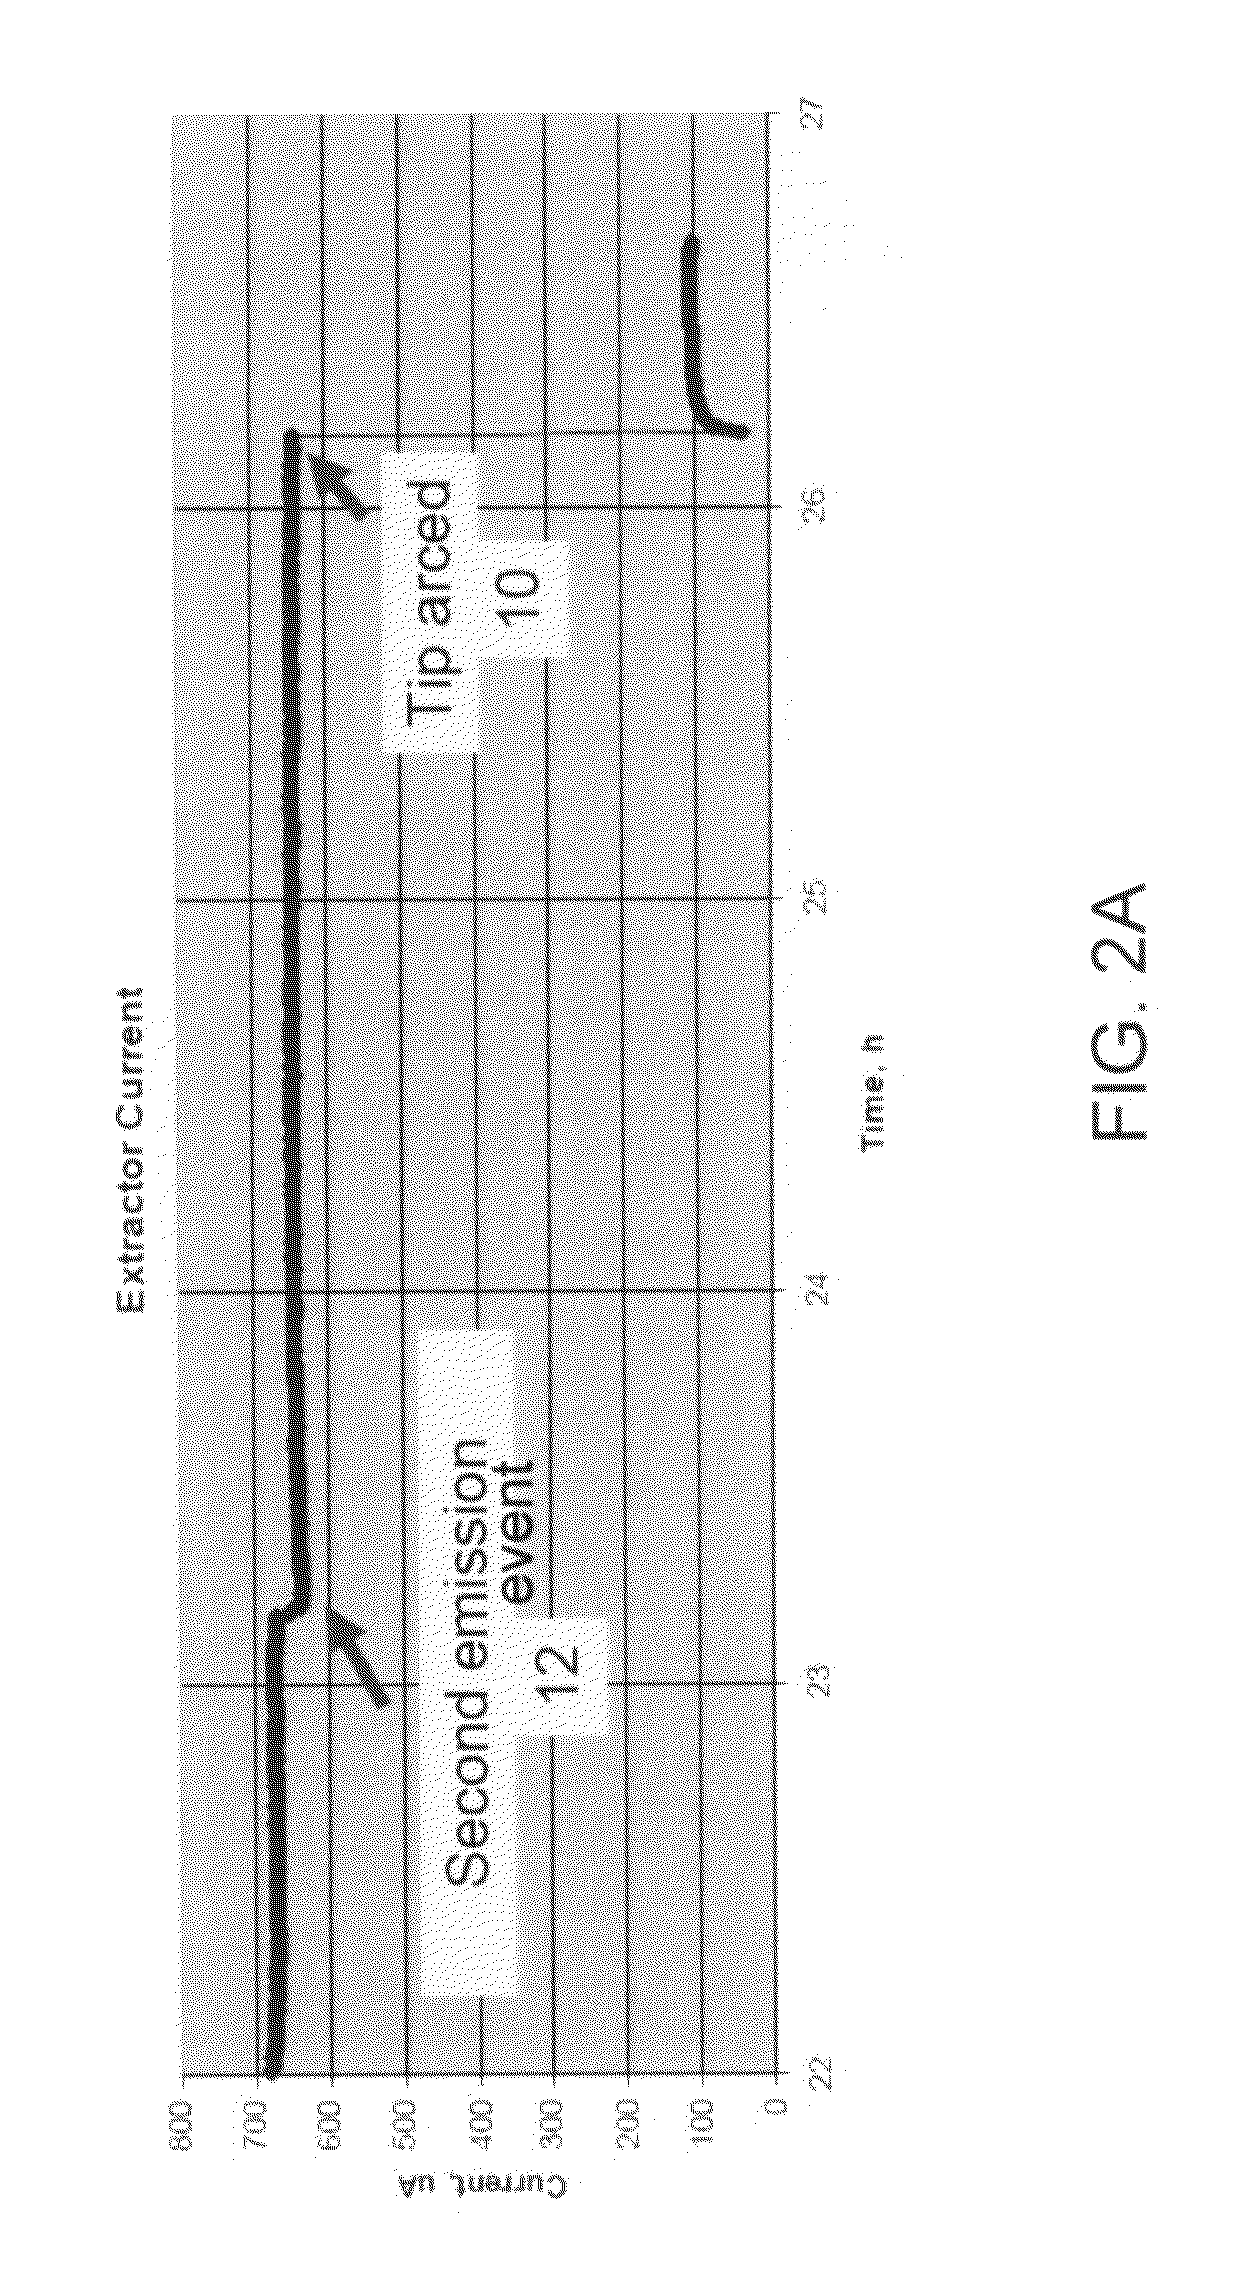 Thermal field emission electron gun with reduced arcing